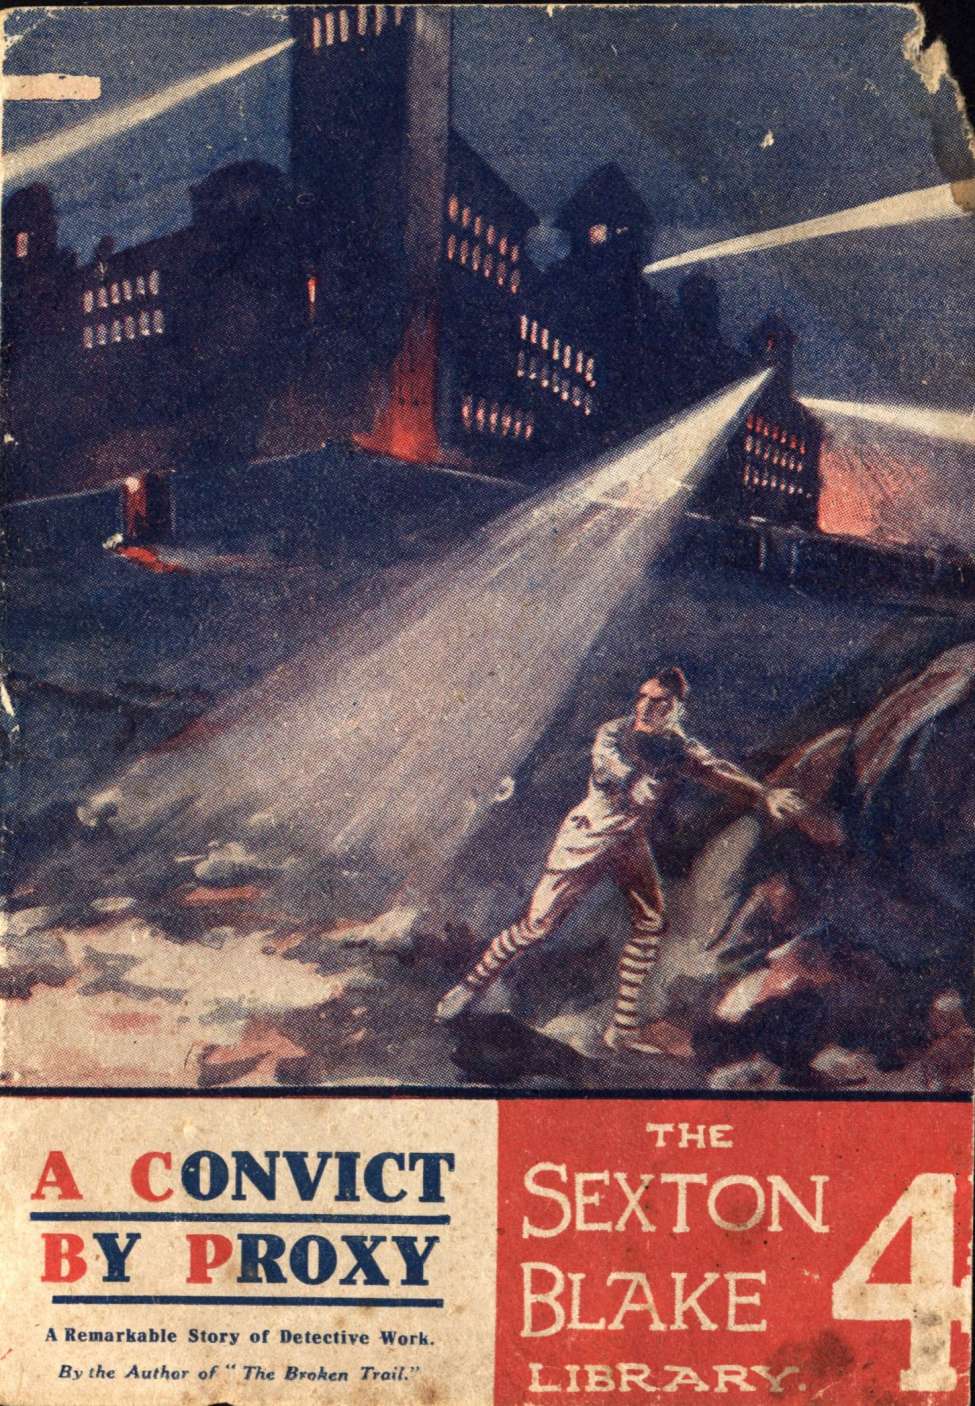 Book Cover For Sexton Blake Library S1 76 - A Convict by Proxy